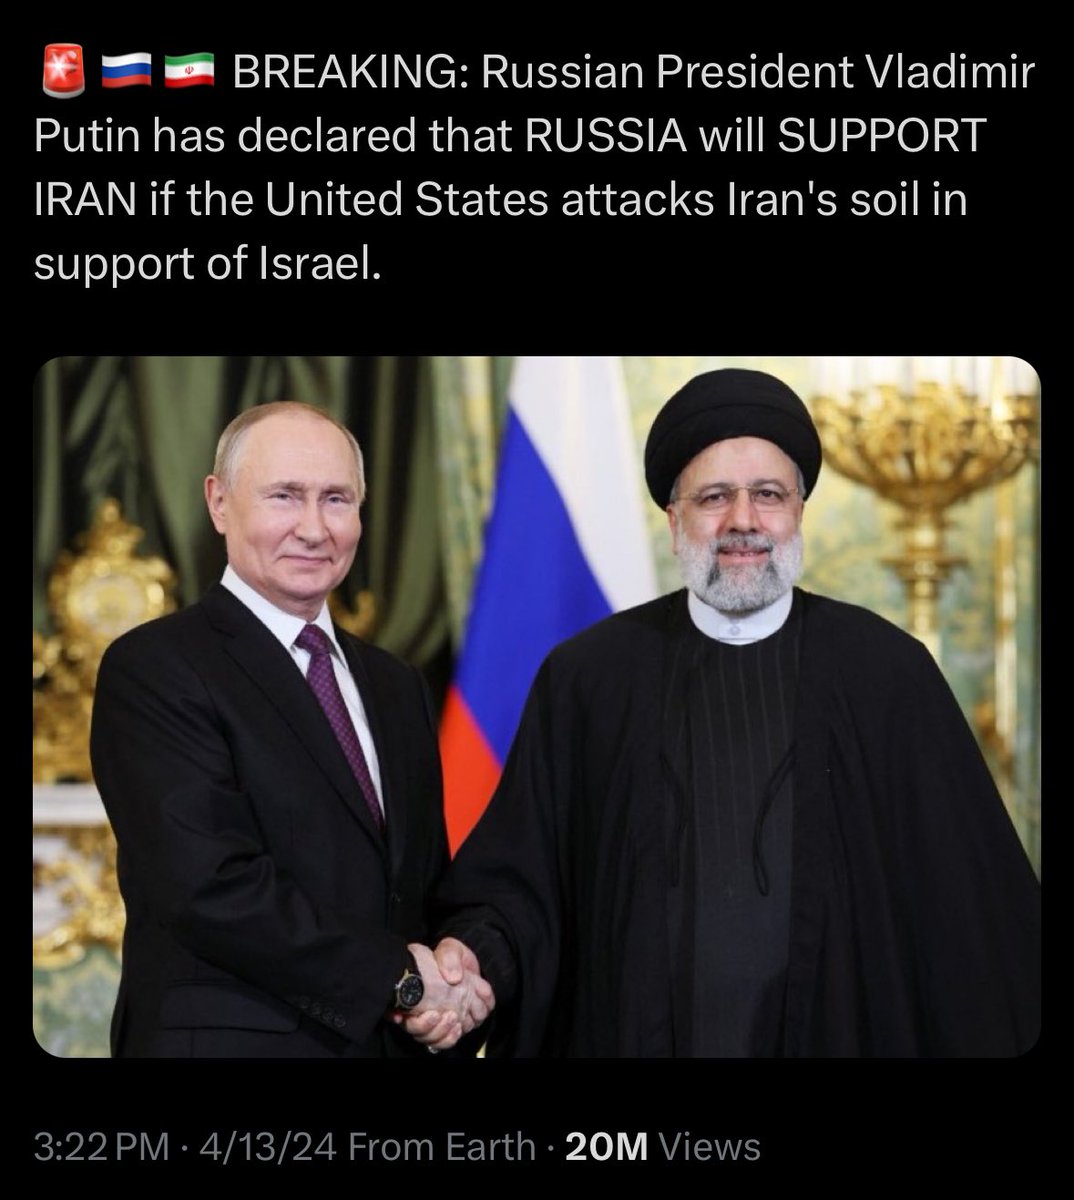 President Putin has not made any public statements in relation to the escalation of tensions between Israel and Iran. Please don’t spread fake news.